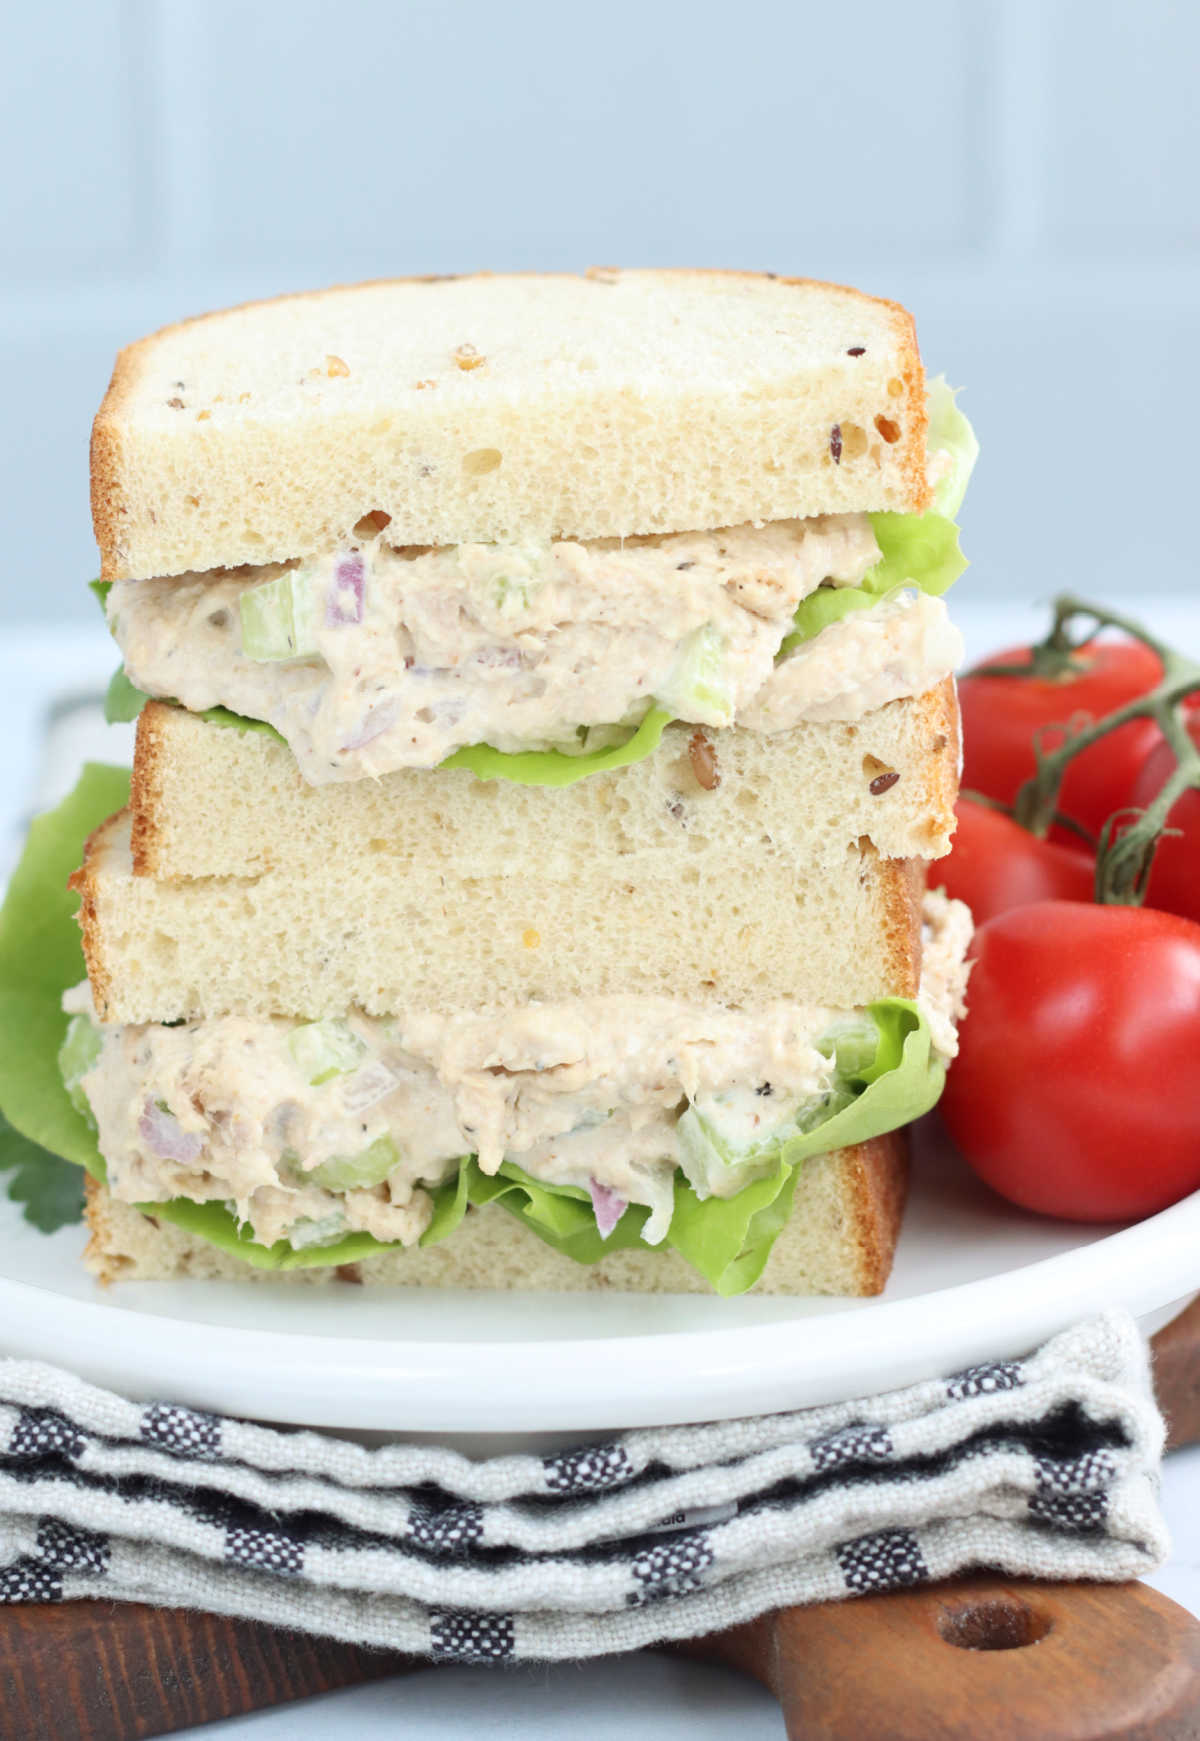 Tuna salad sandwich on whole grain bread with lettuce, stacked on each other on plate, tomatoes to side.